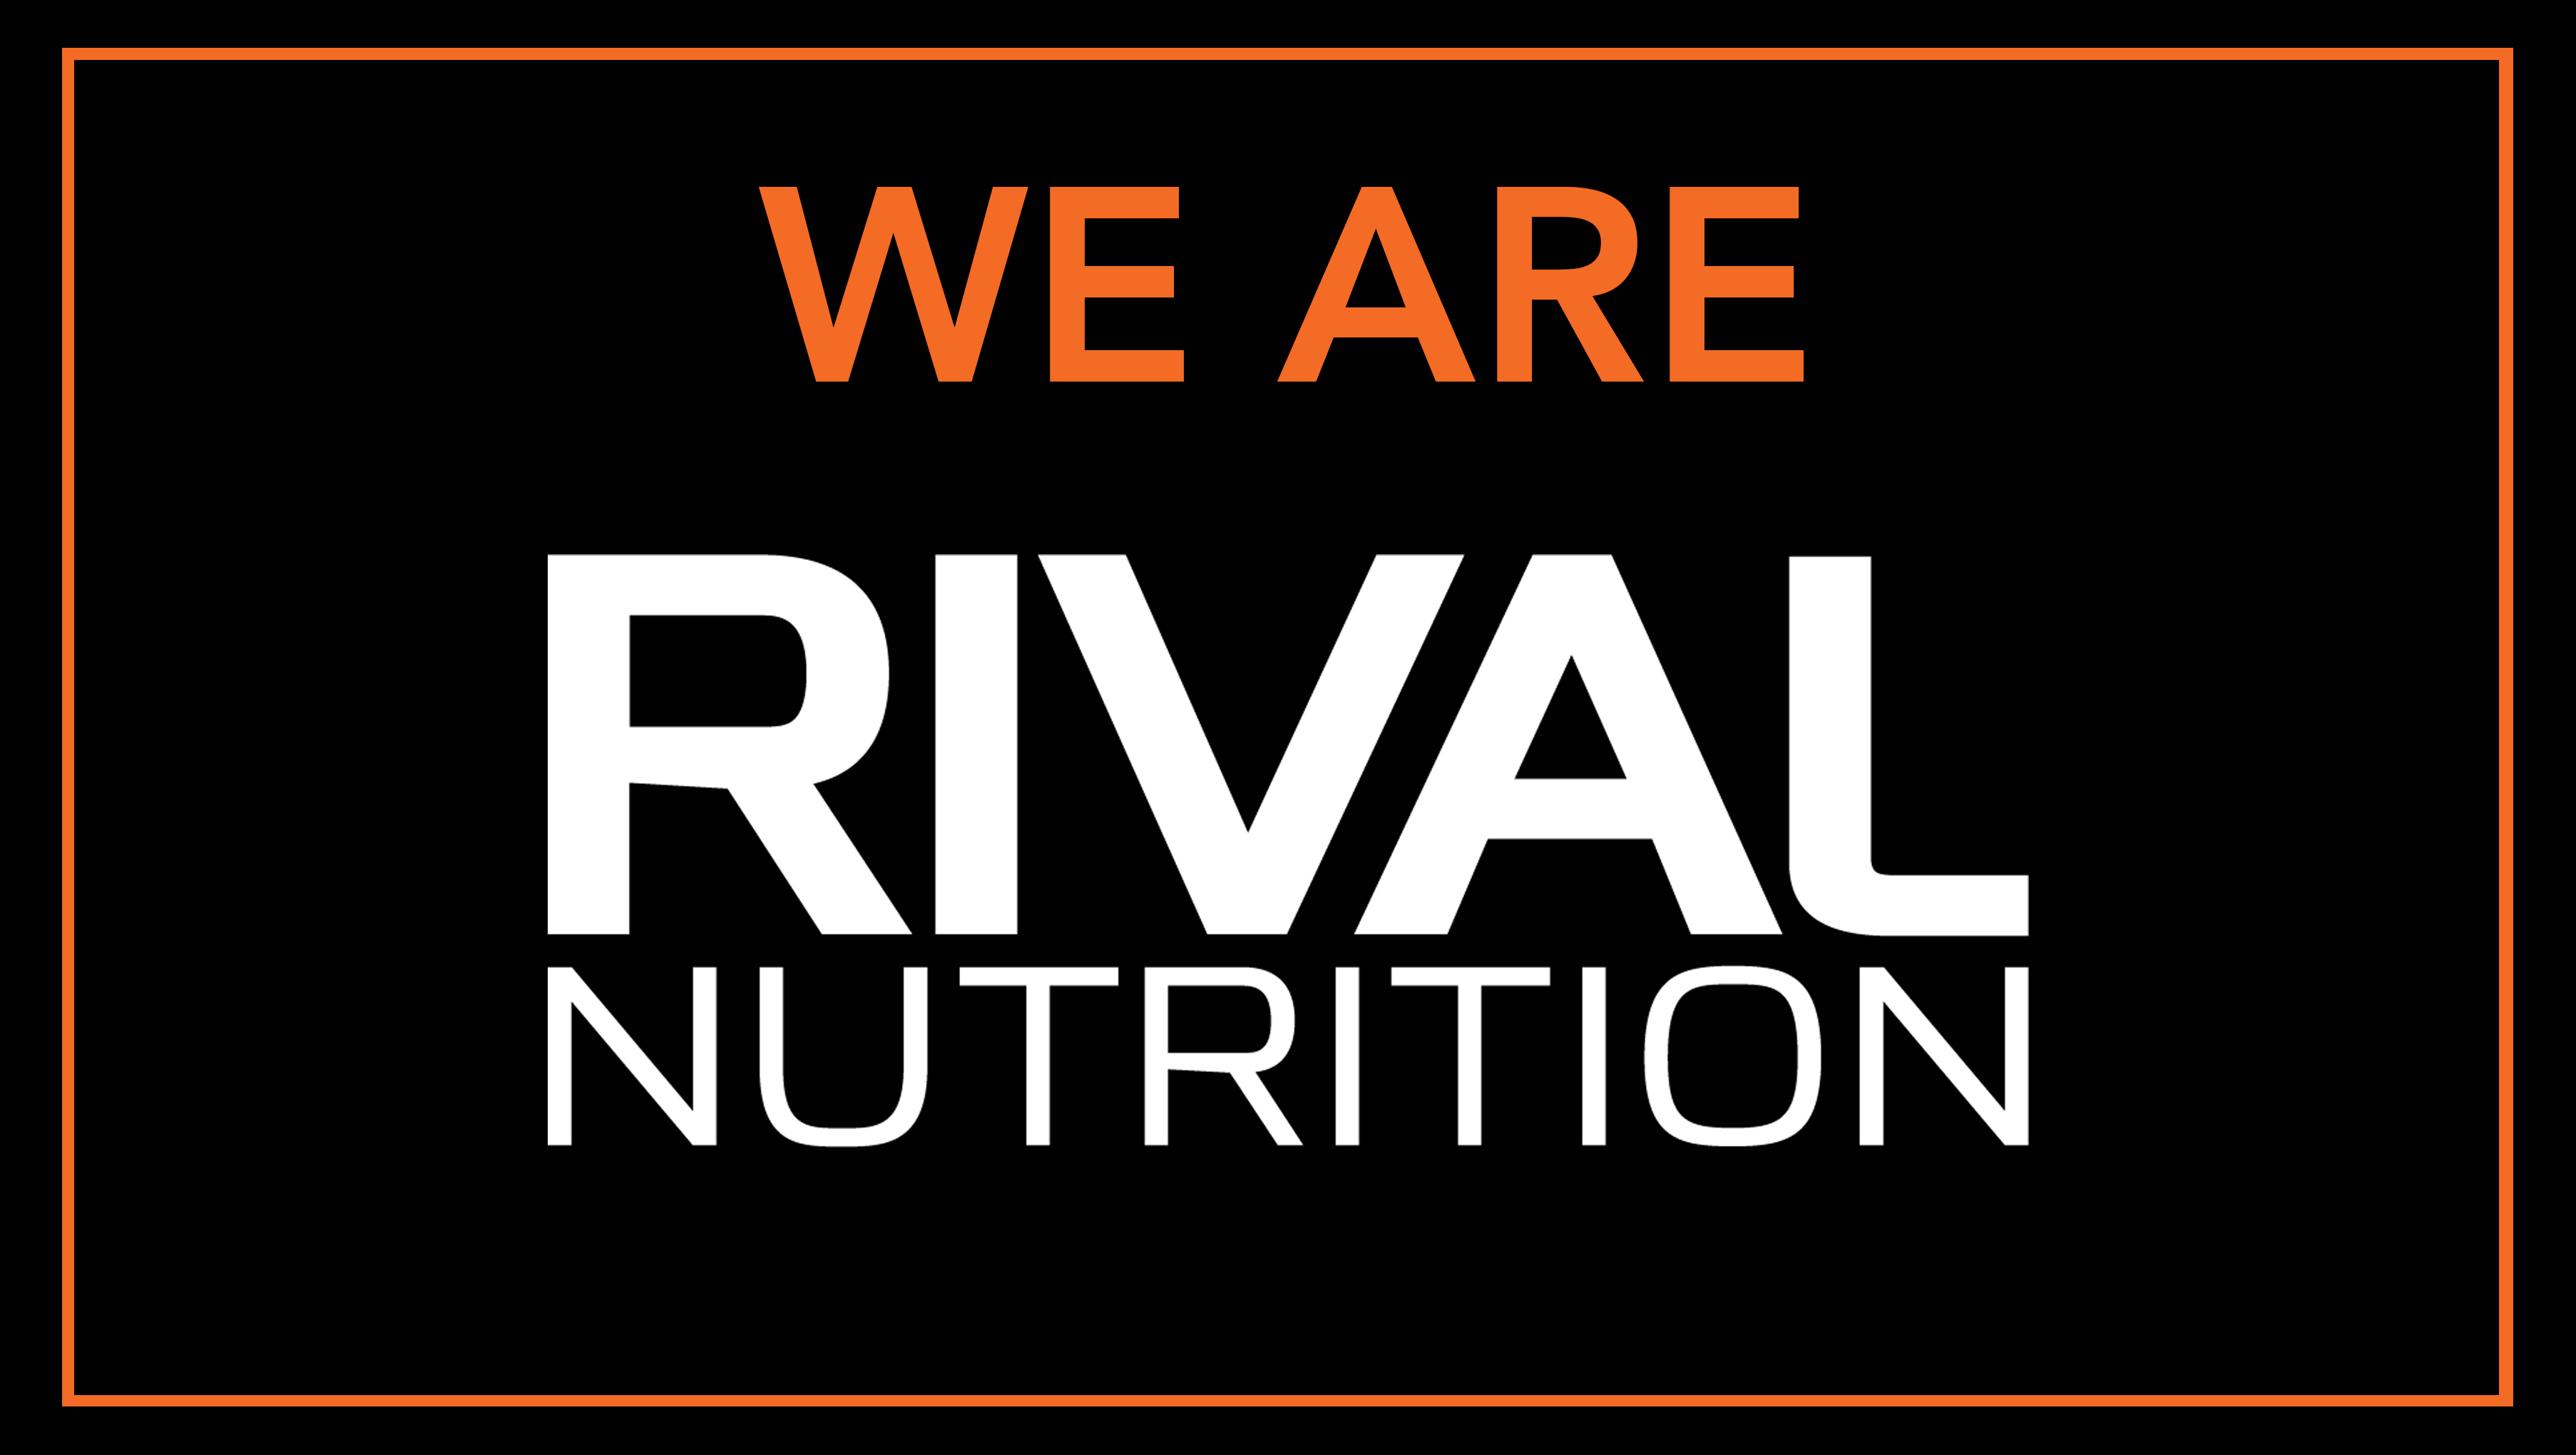 WE ARE RIVAL NUTRITION